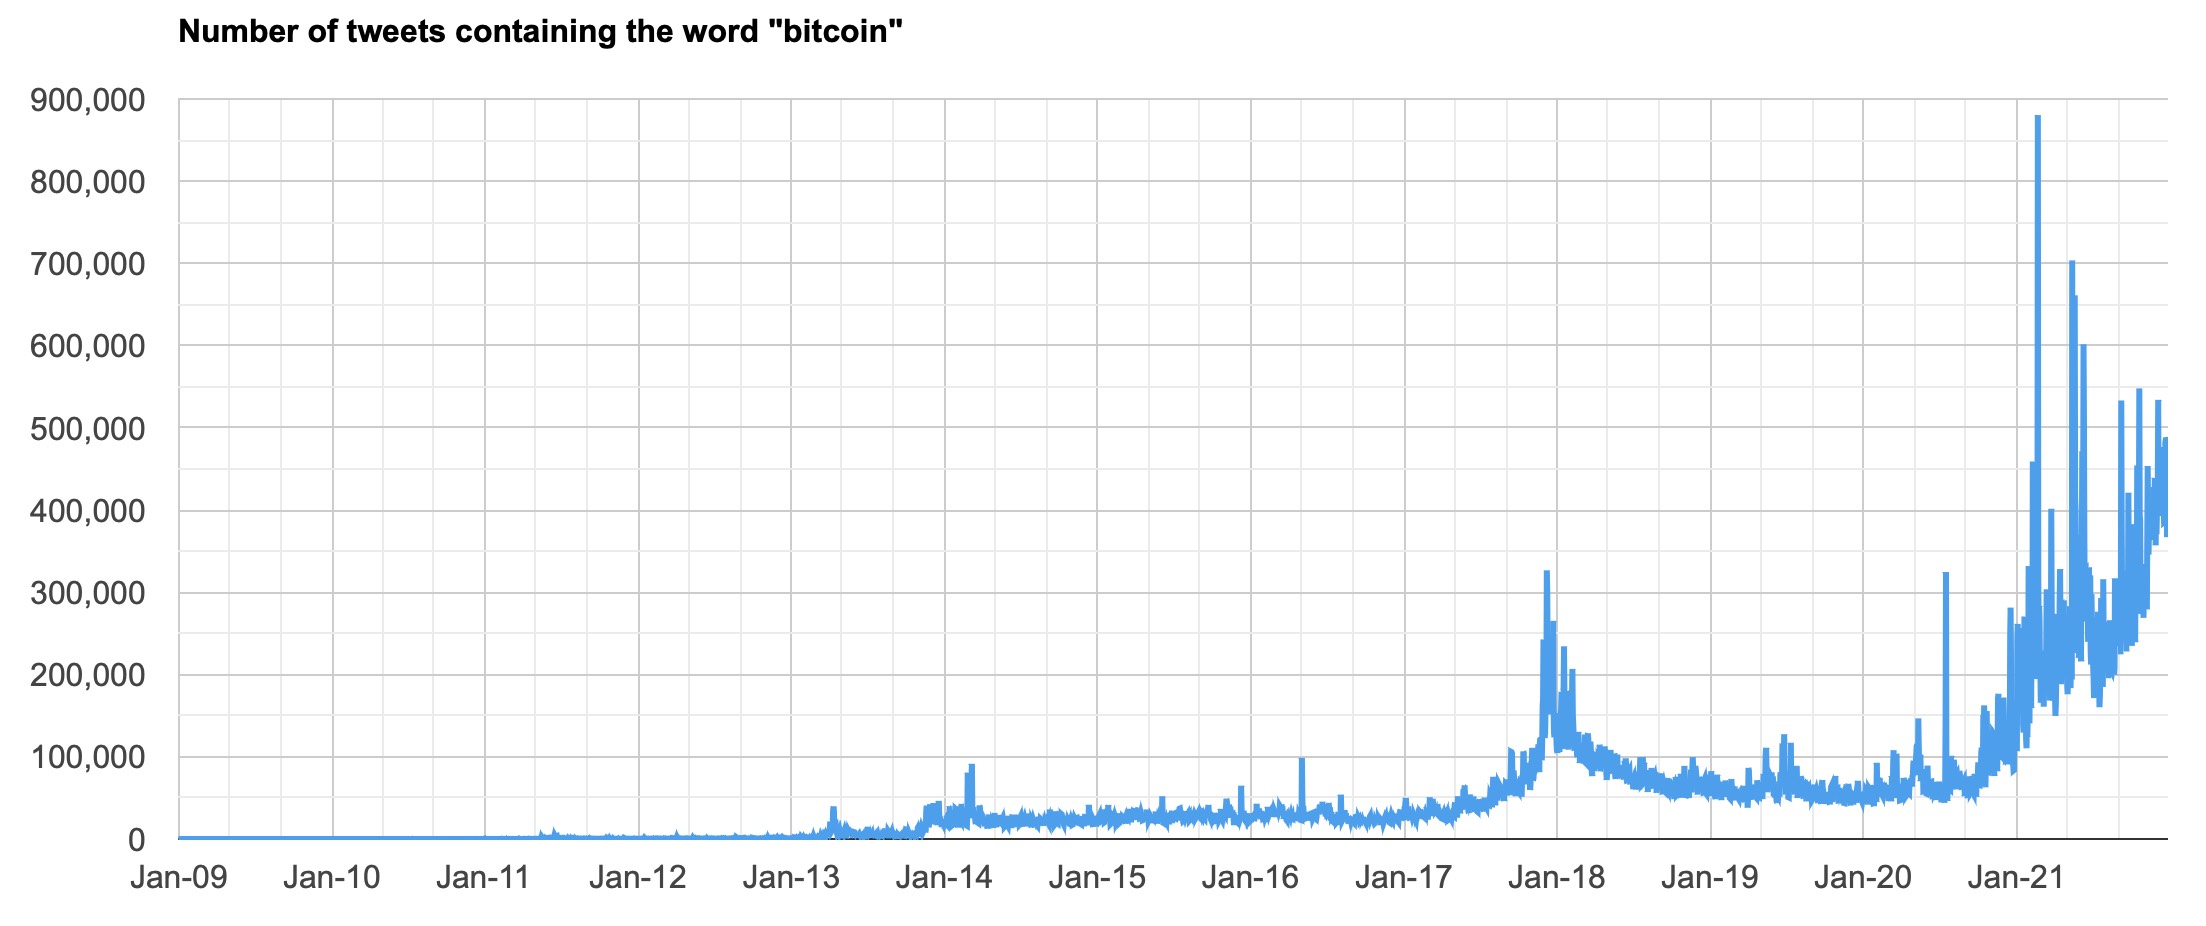 There were more than 100 million tweets mentioning Bitcoin in 2021